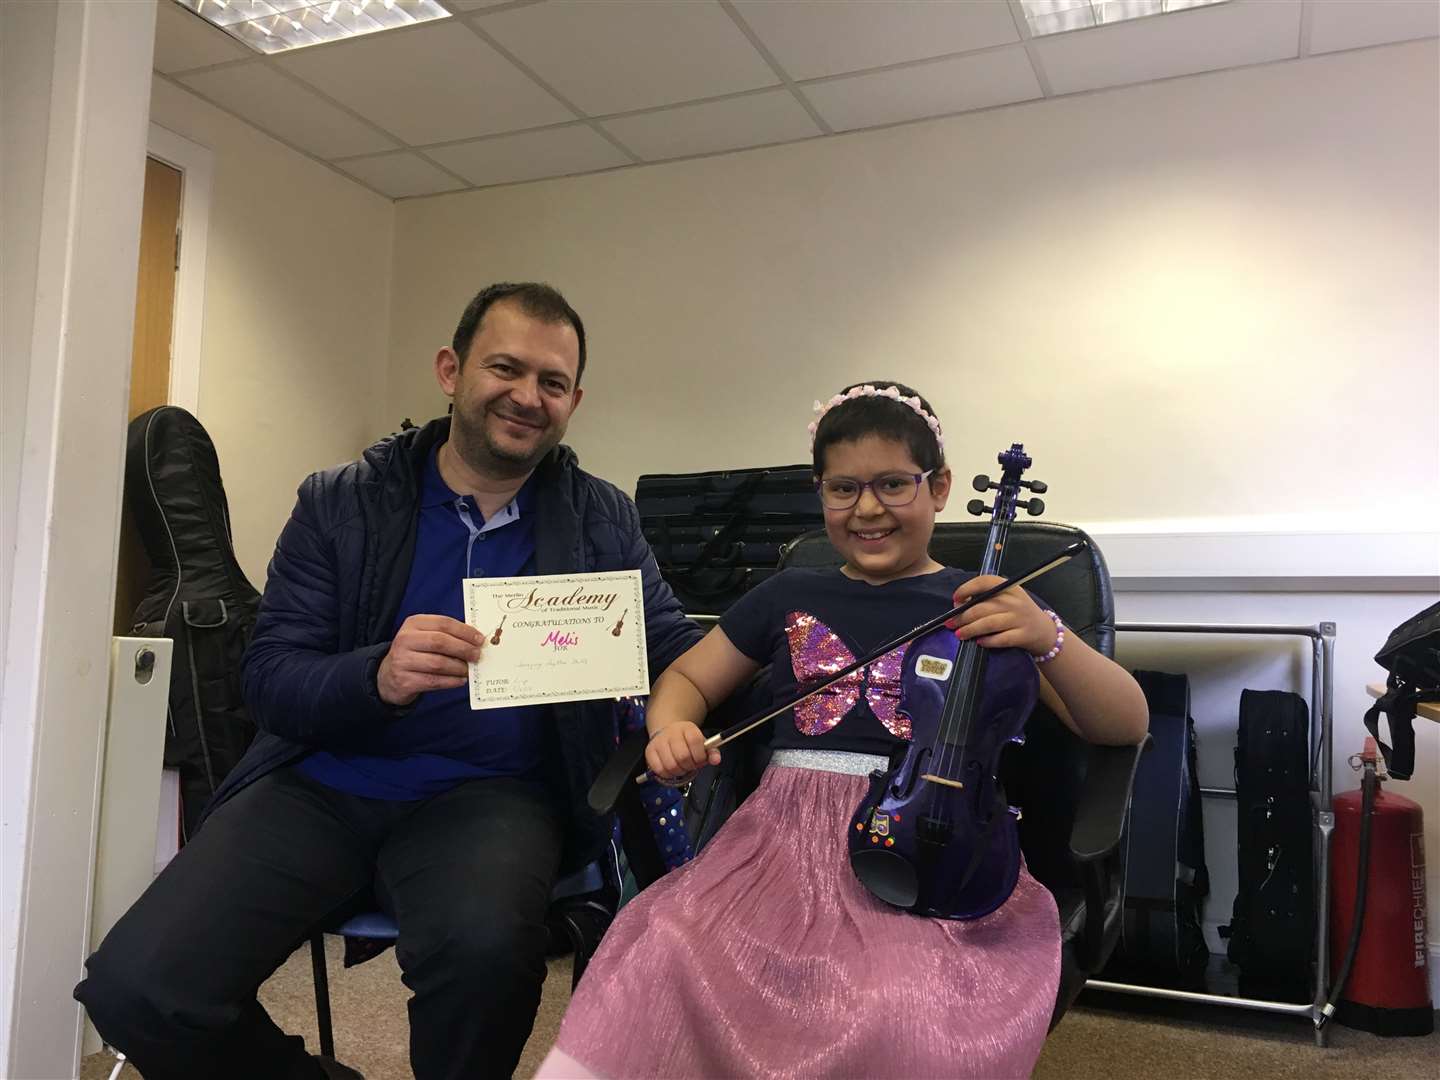 Melis Mistik, from Galashiels, is learning music at Merlin Music Academy sponsored through the Logan's Fund Always A Rainbow project.